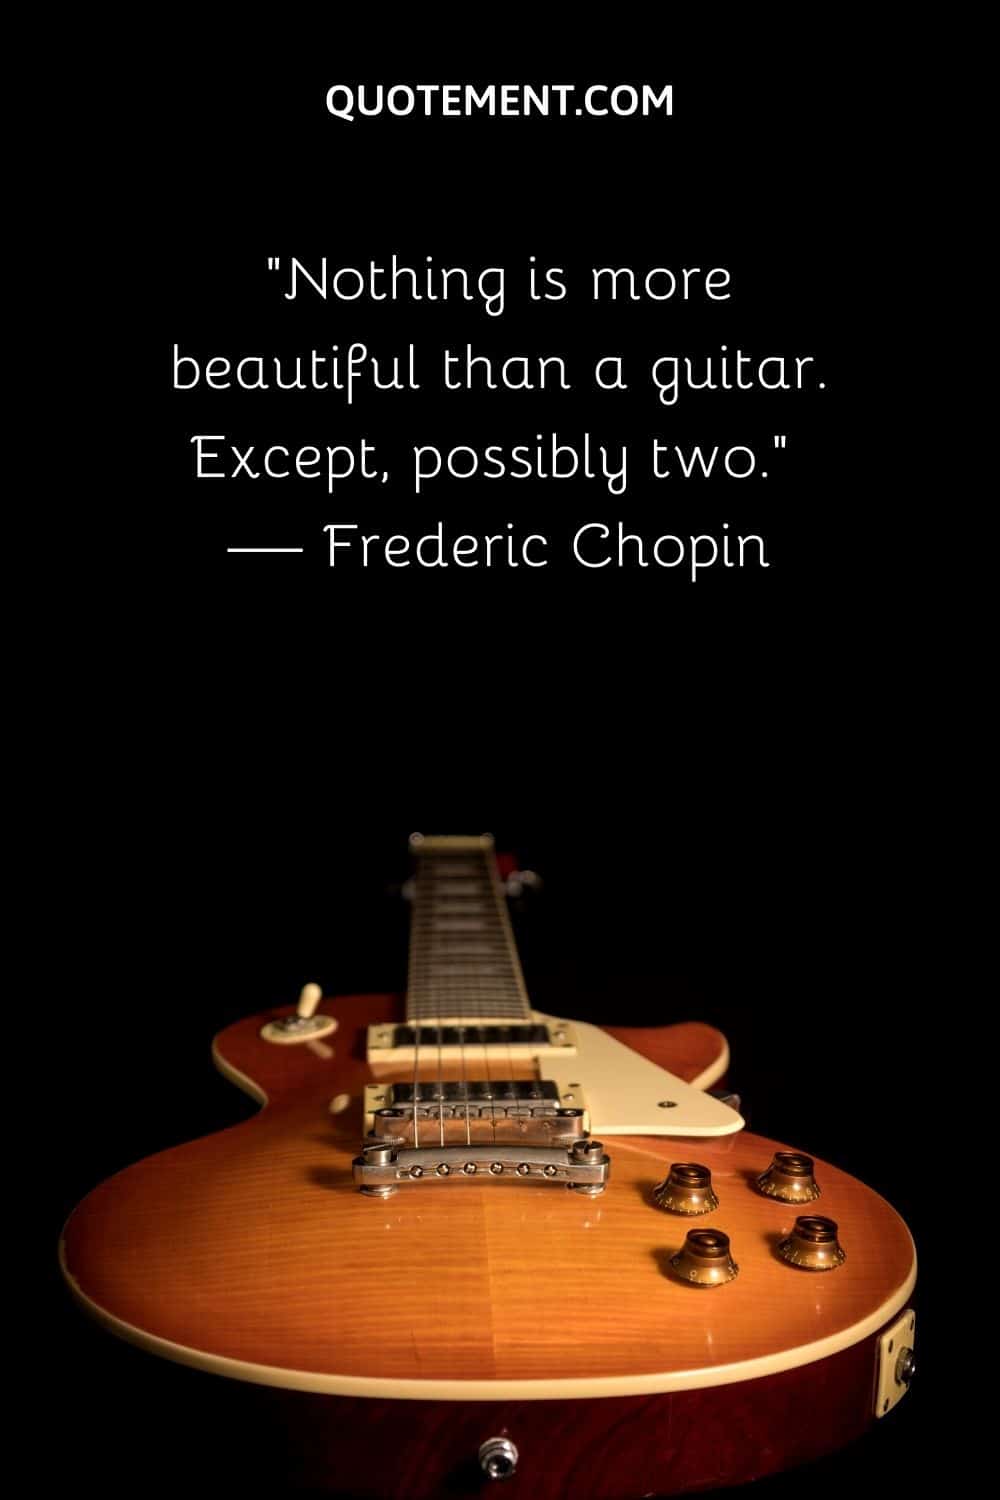 Nothing is more beautiful than a guitar.